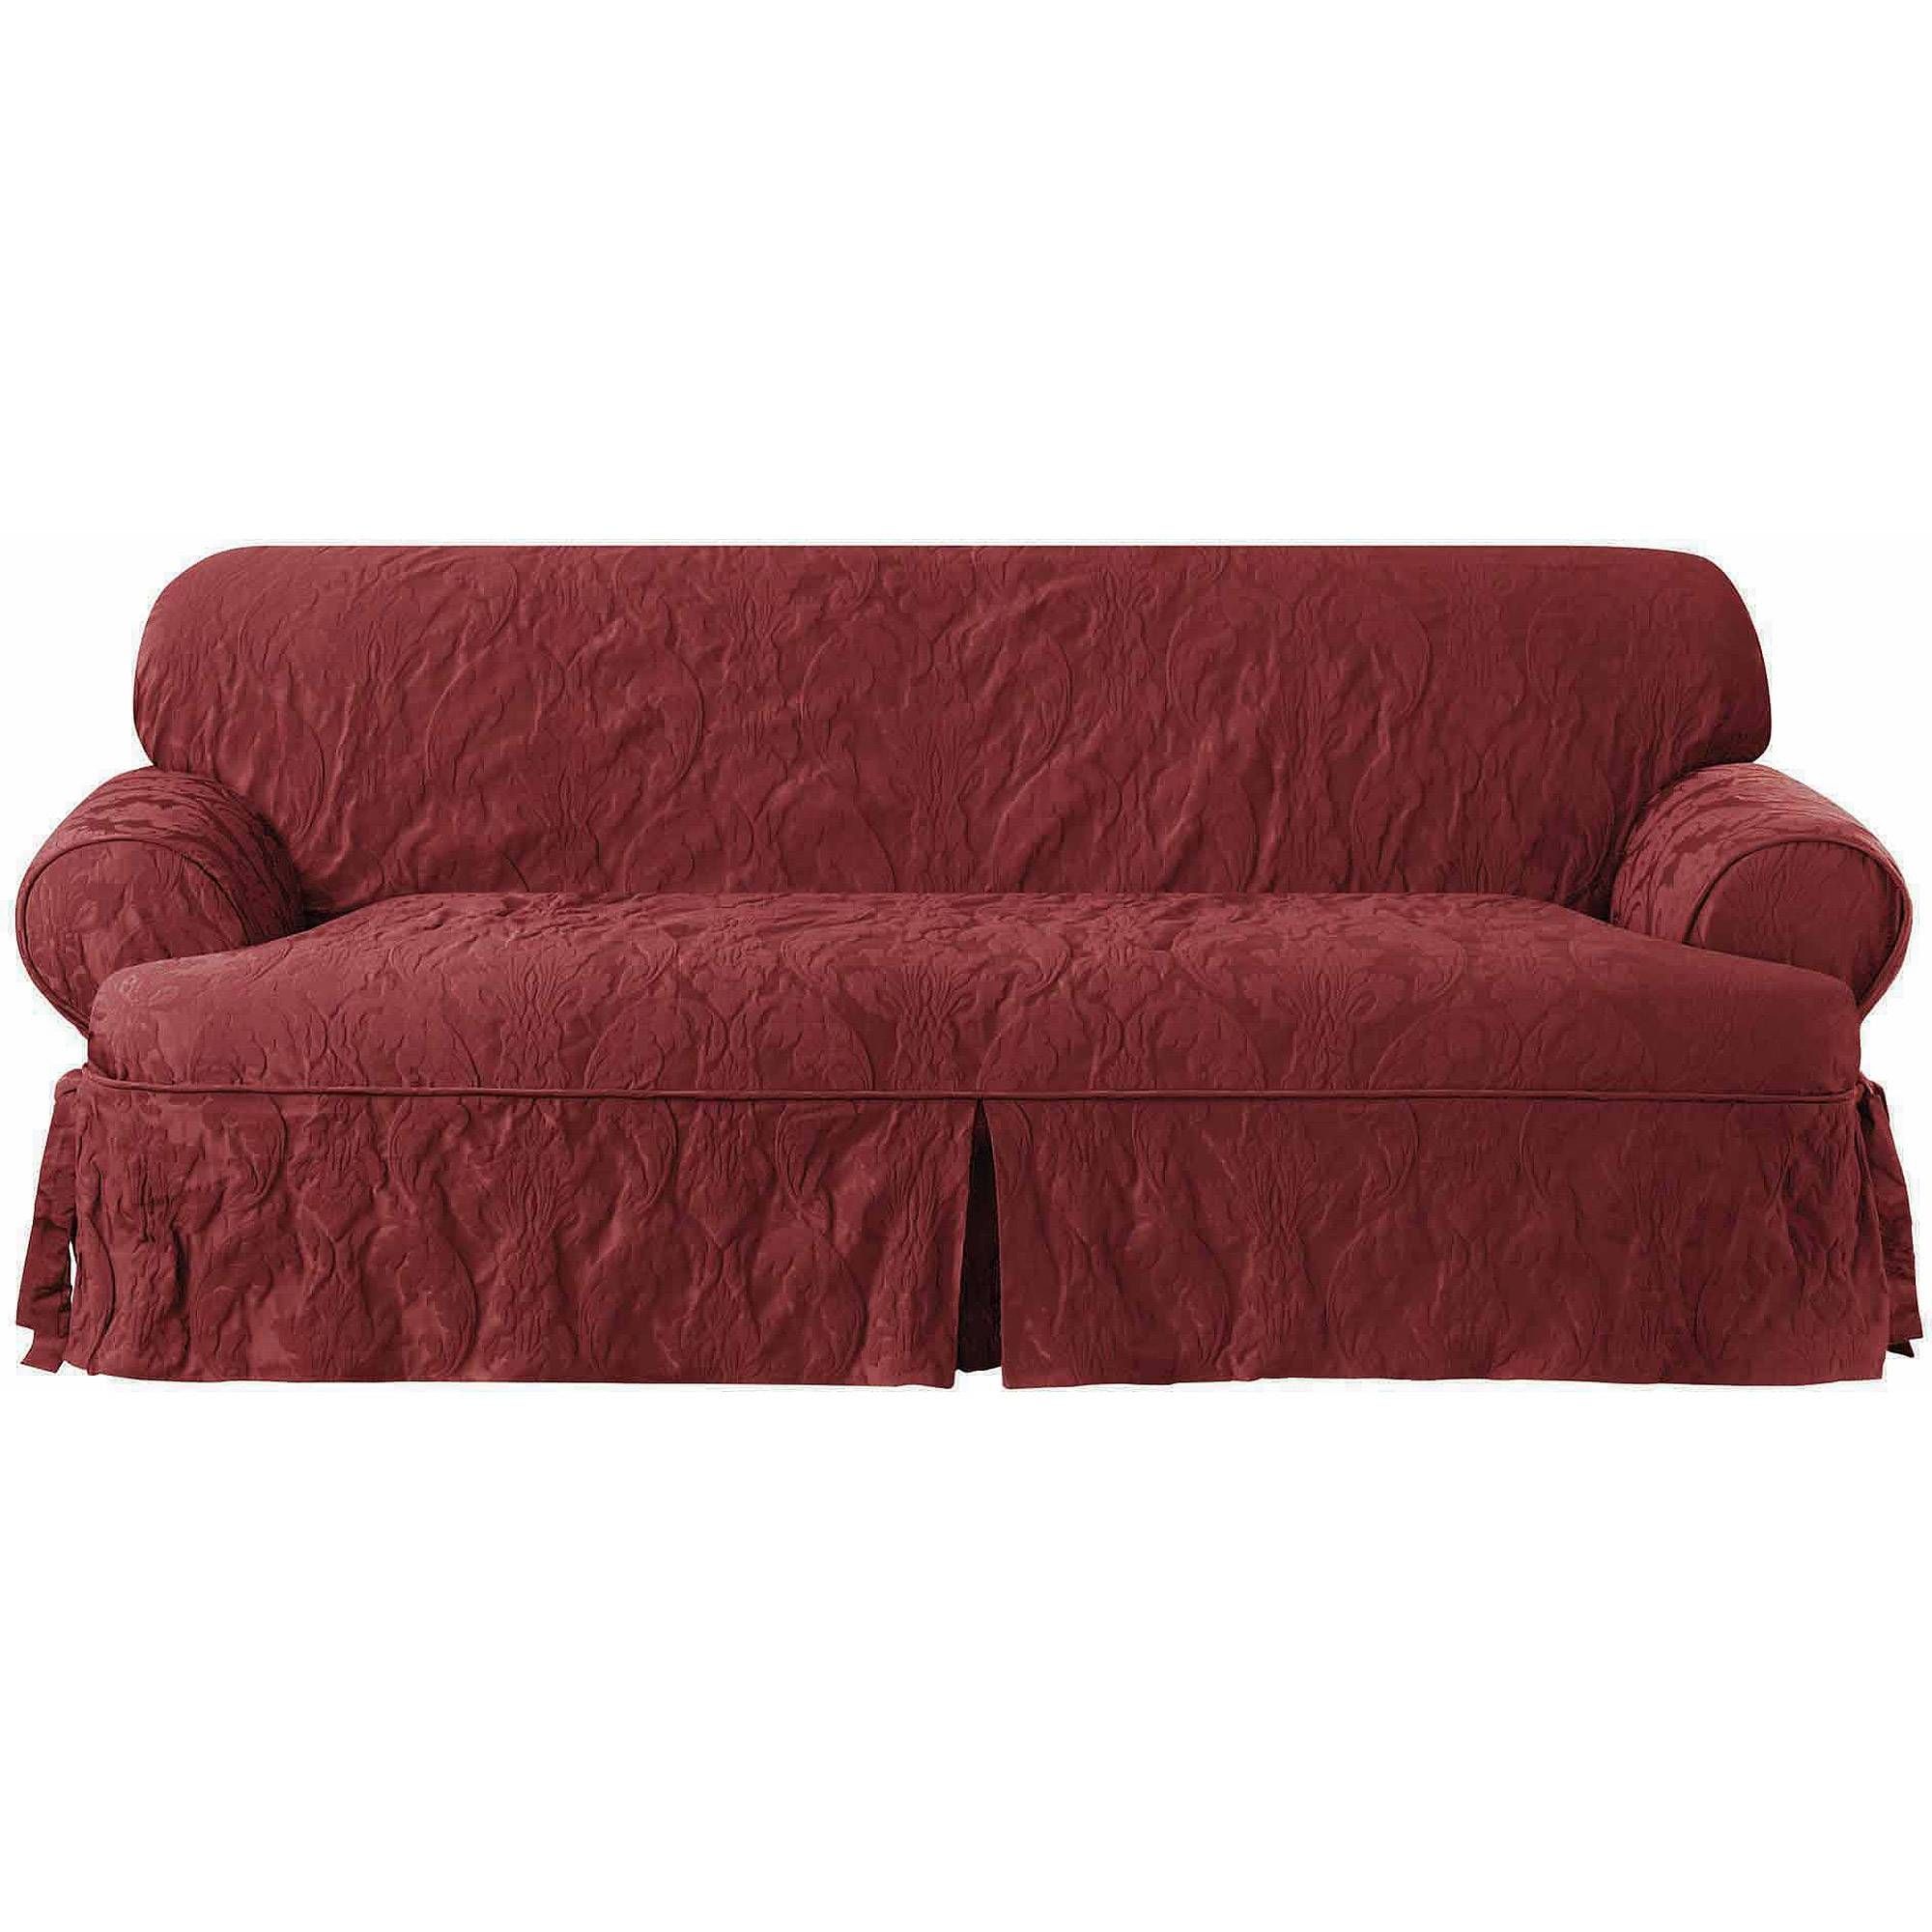 3 Piece T Cushion Slipcovers For Sofas | Centerfieldbar With Regard To 3 Piece Sofa Covers (View 5 of 15)